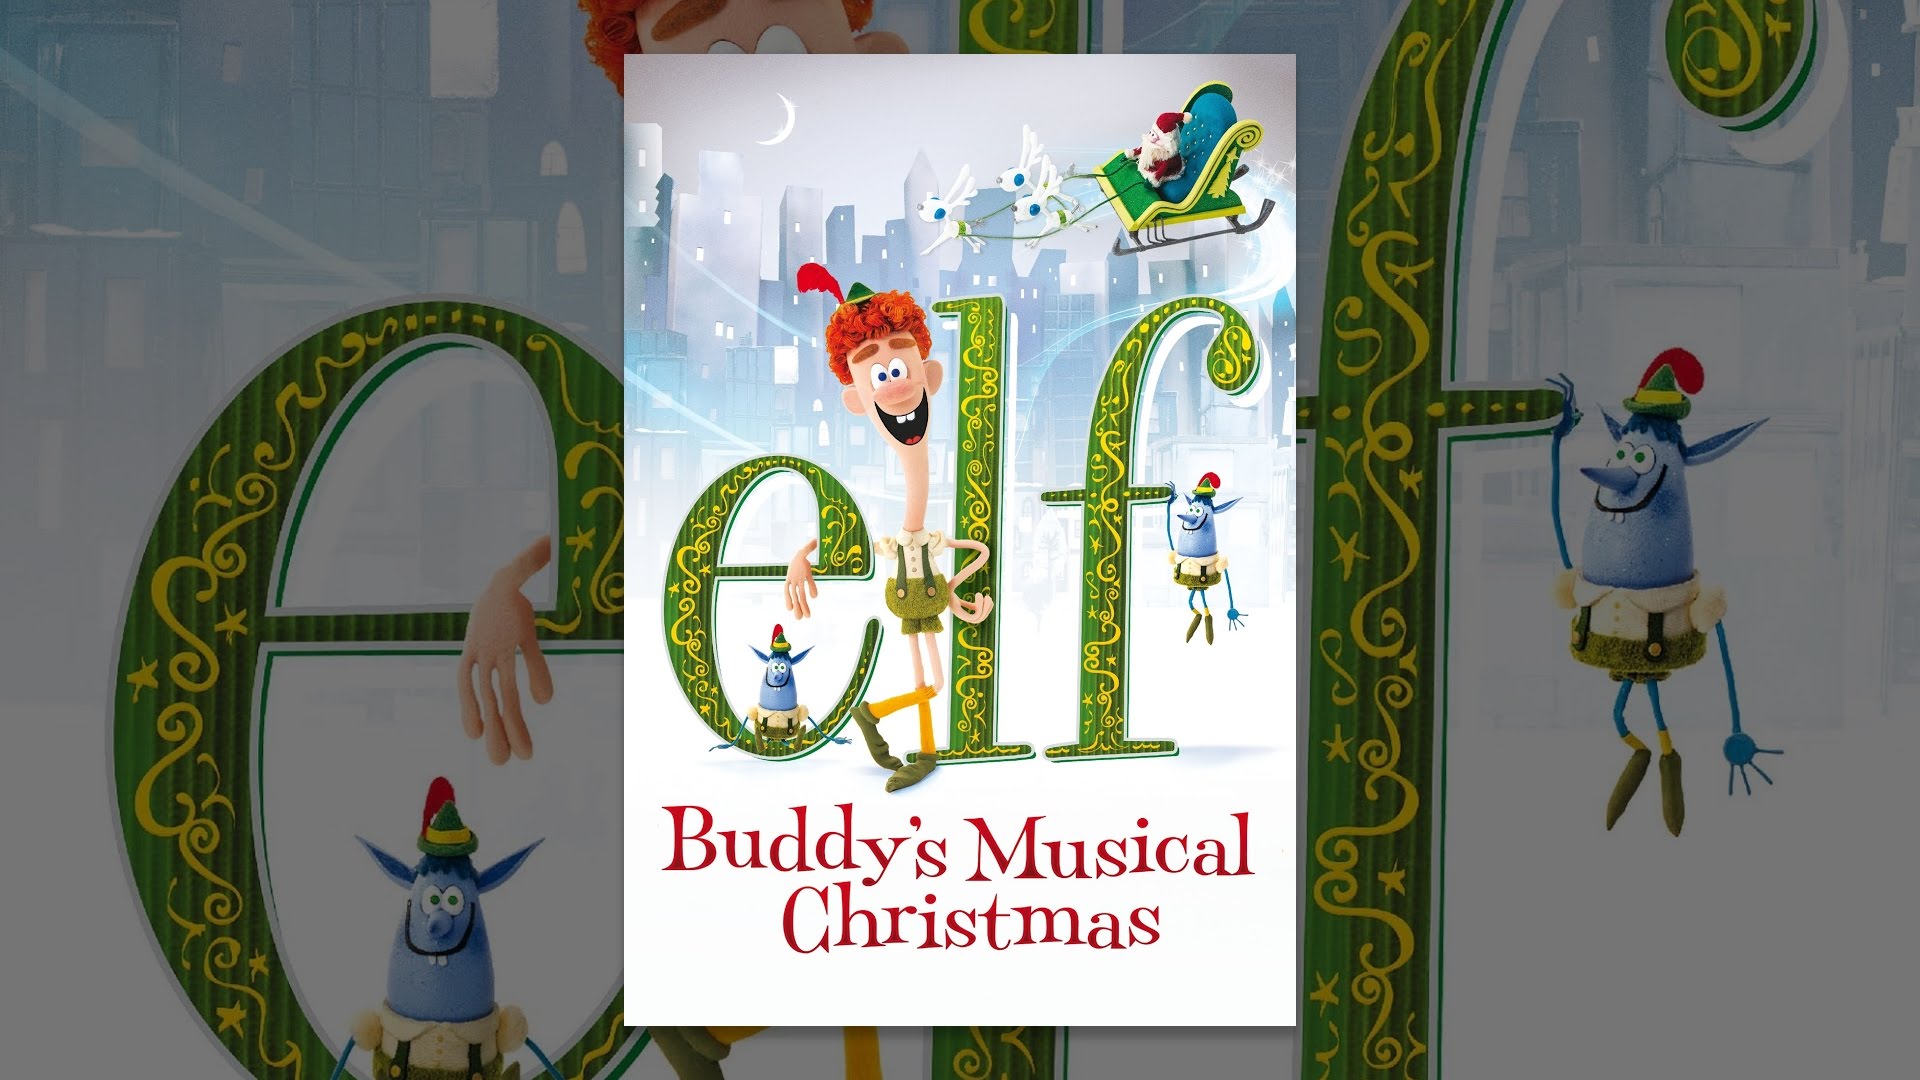 🎄 Get ready for a 'wascally' dose of holiday cheer with Bugs Bunny as  Buddy the Elf! 🎅✨ The Looney Tunes meet Christmas magic in this…